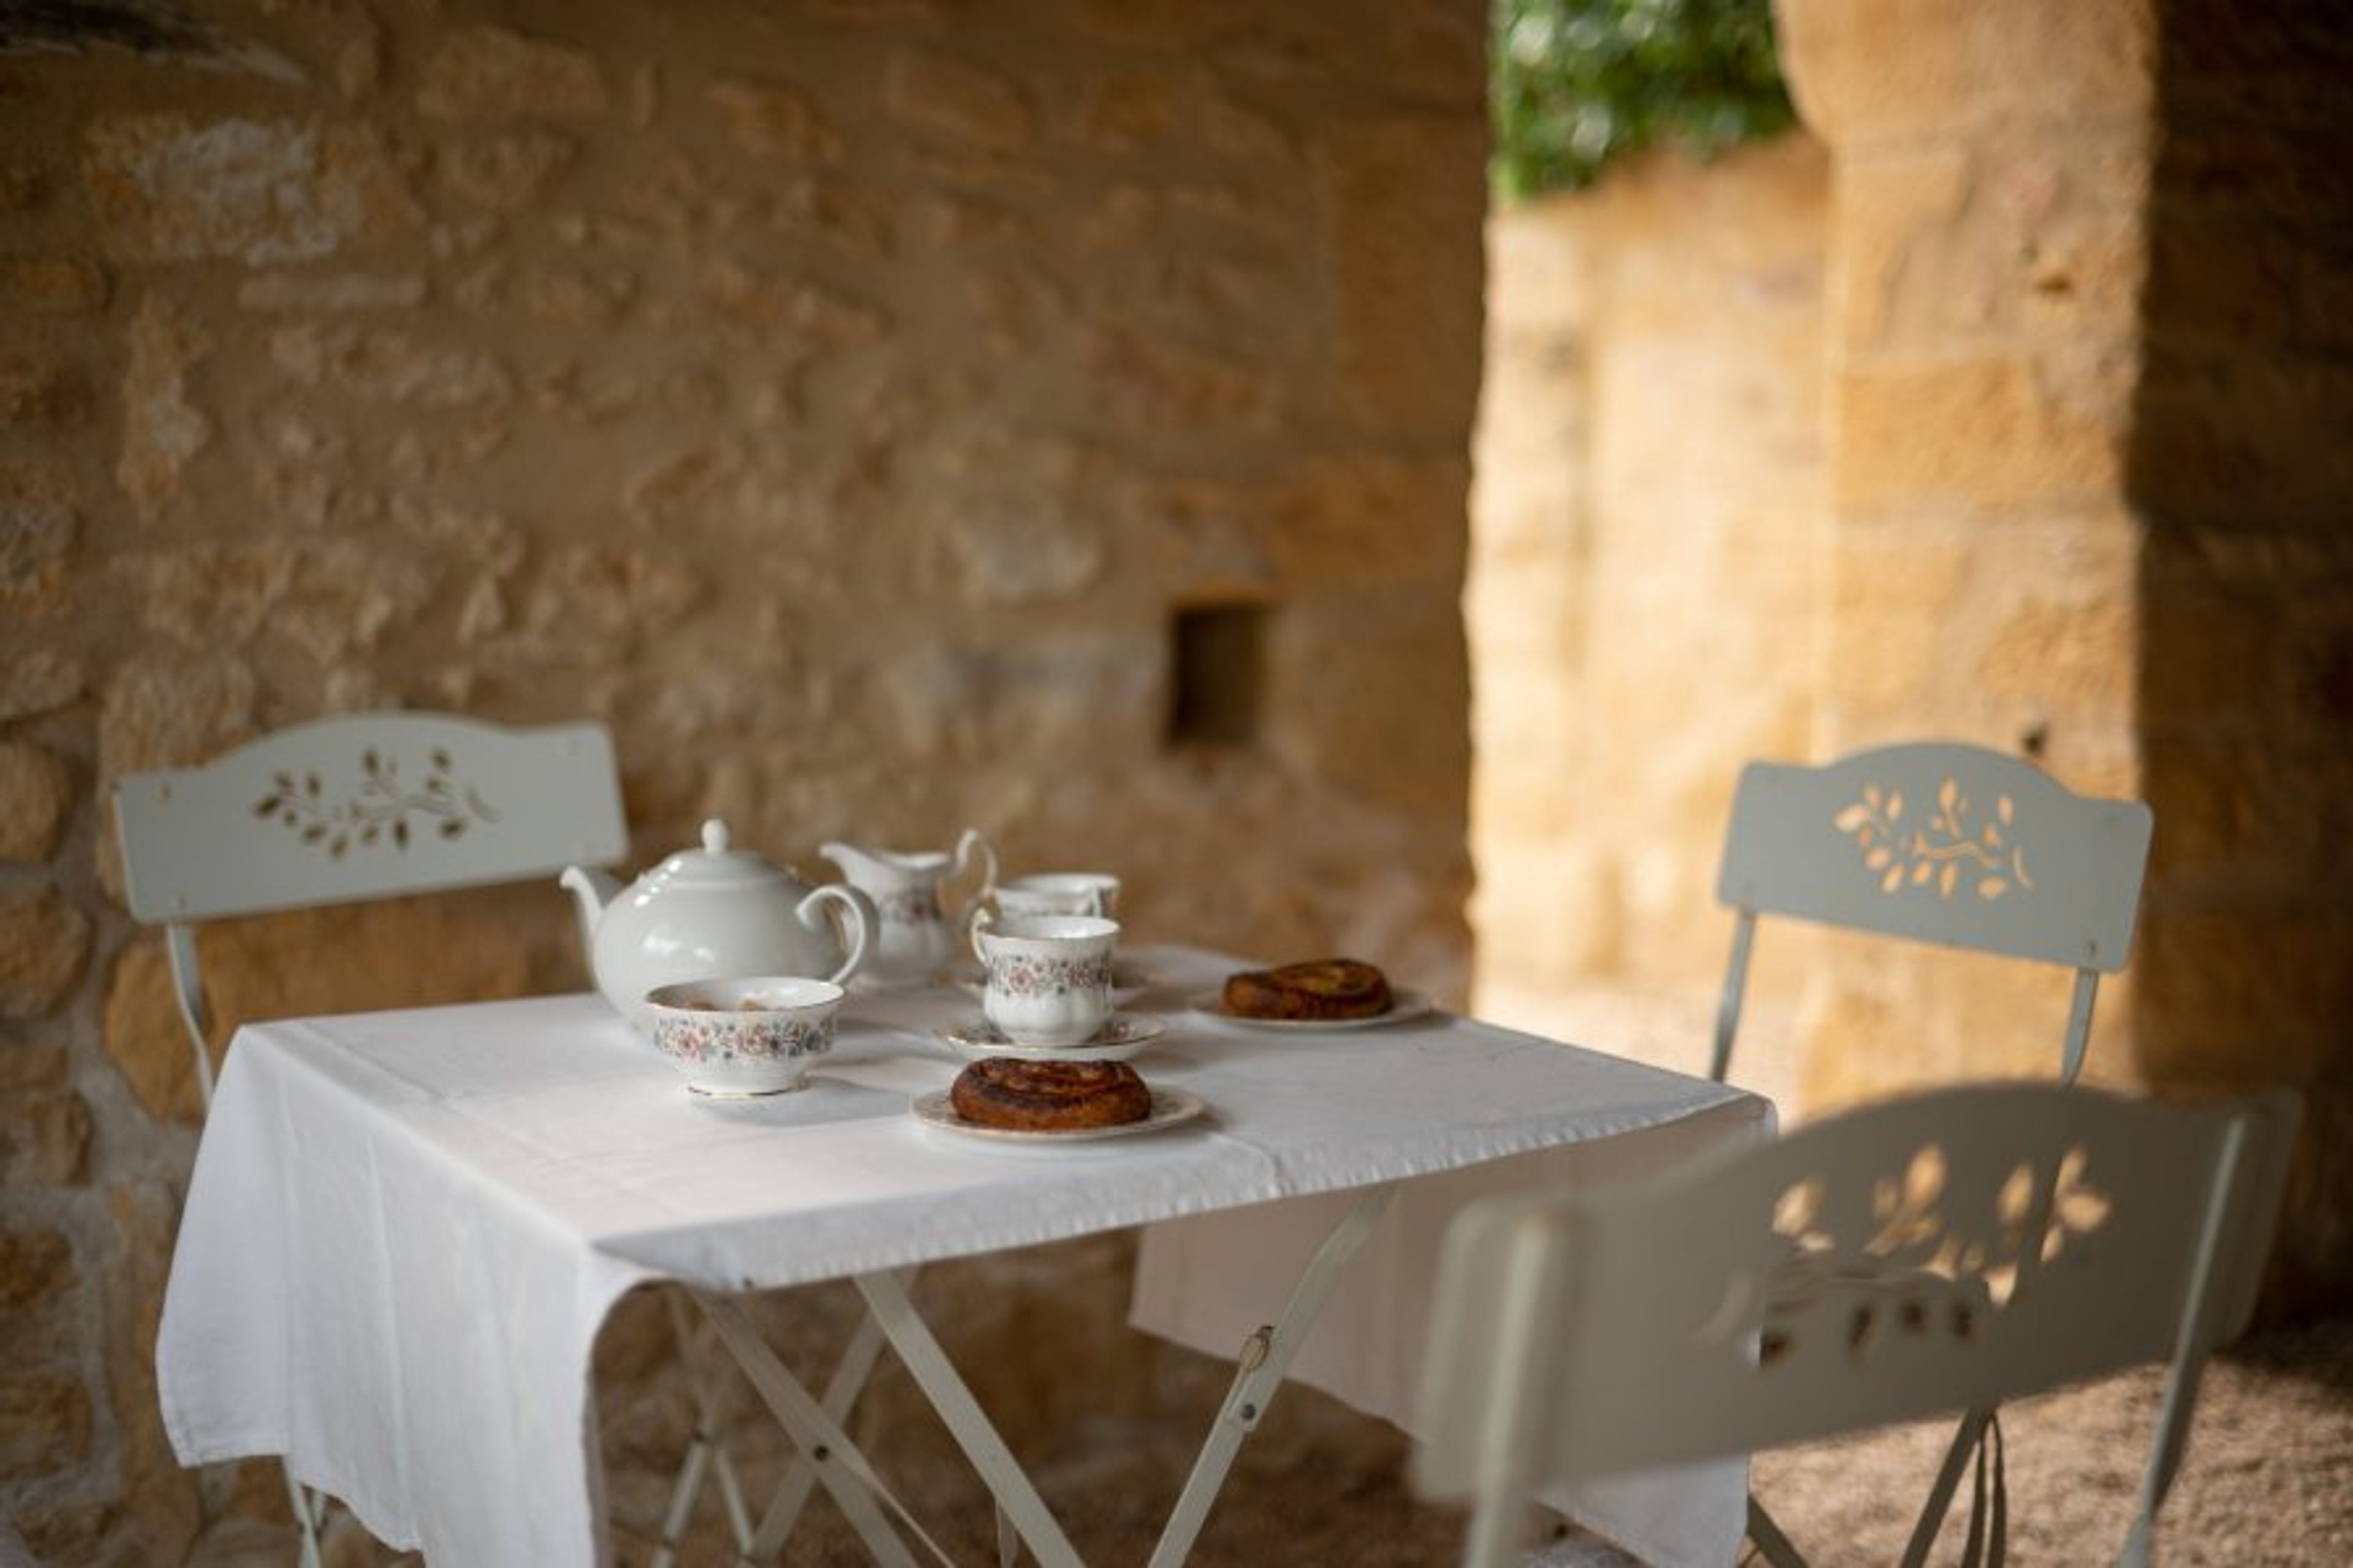 A covered terrace to have breakfast or relax and enjoy the view!